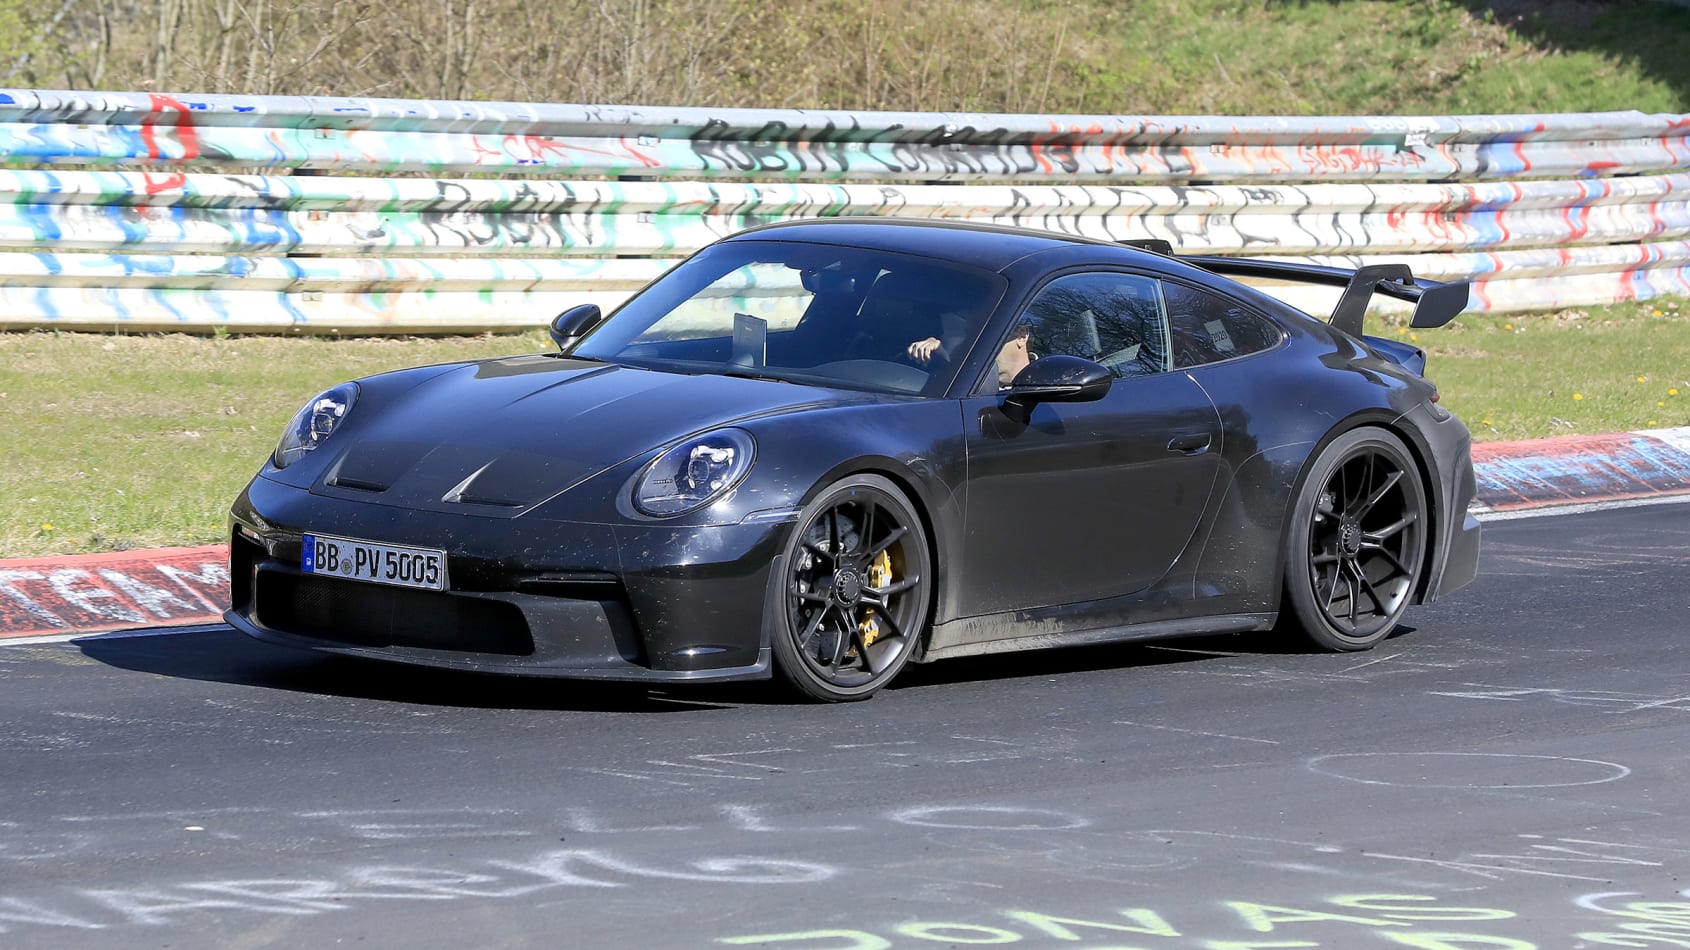 2020 992 Porsche 911 GT3 spied with less camouflage